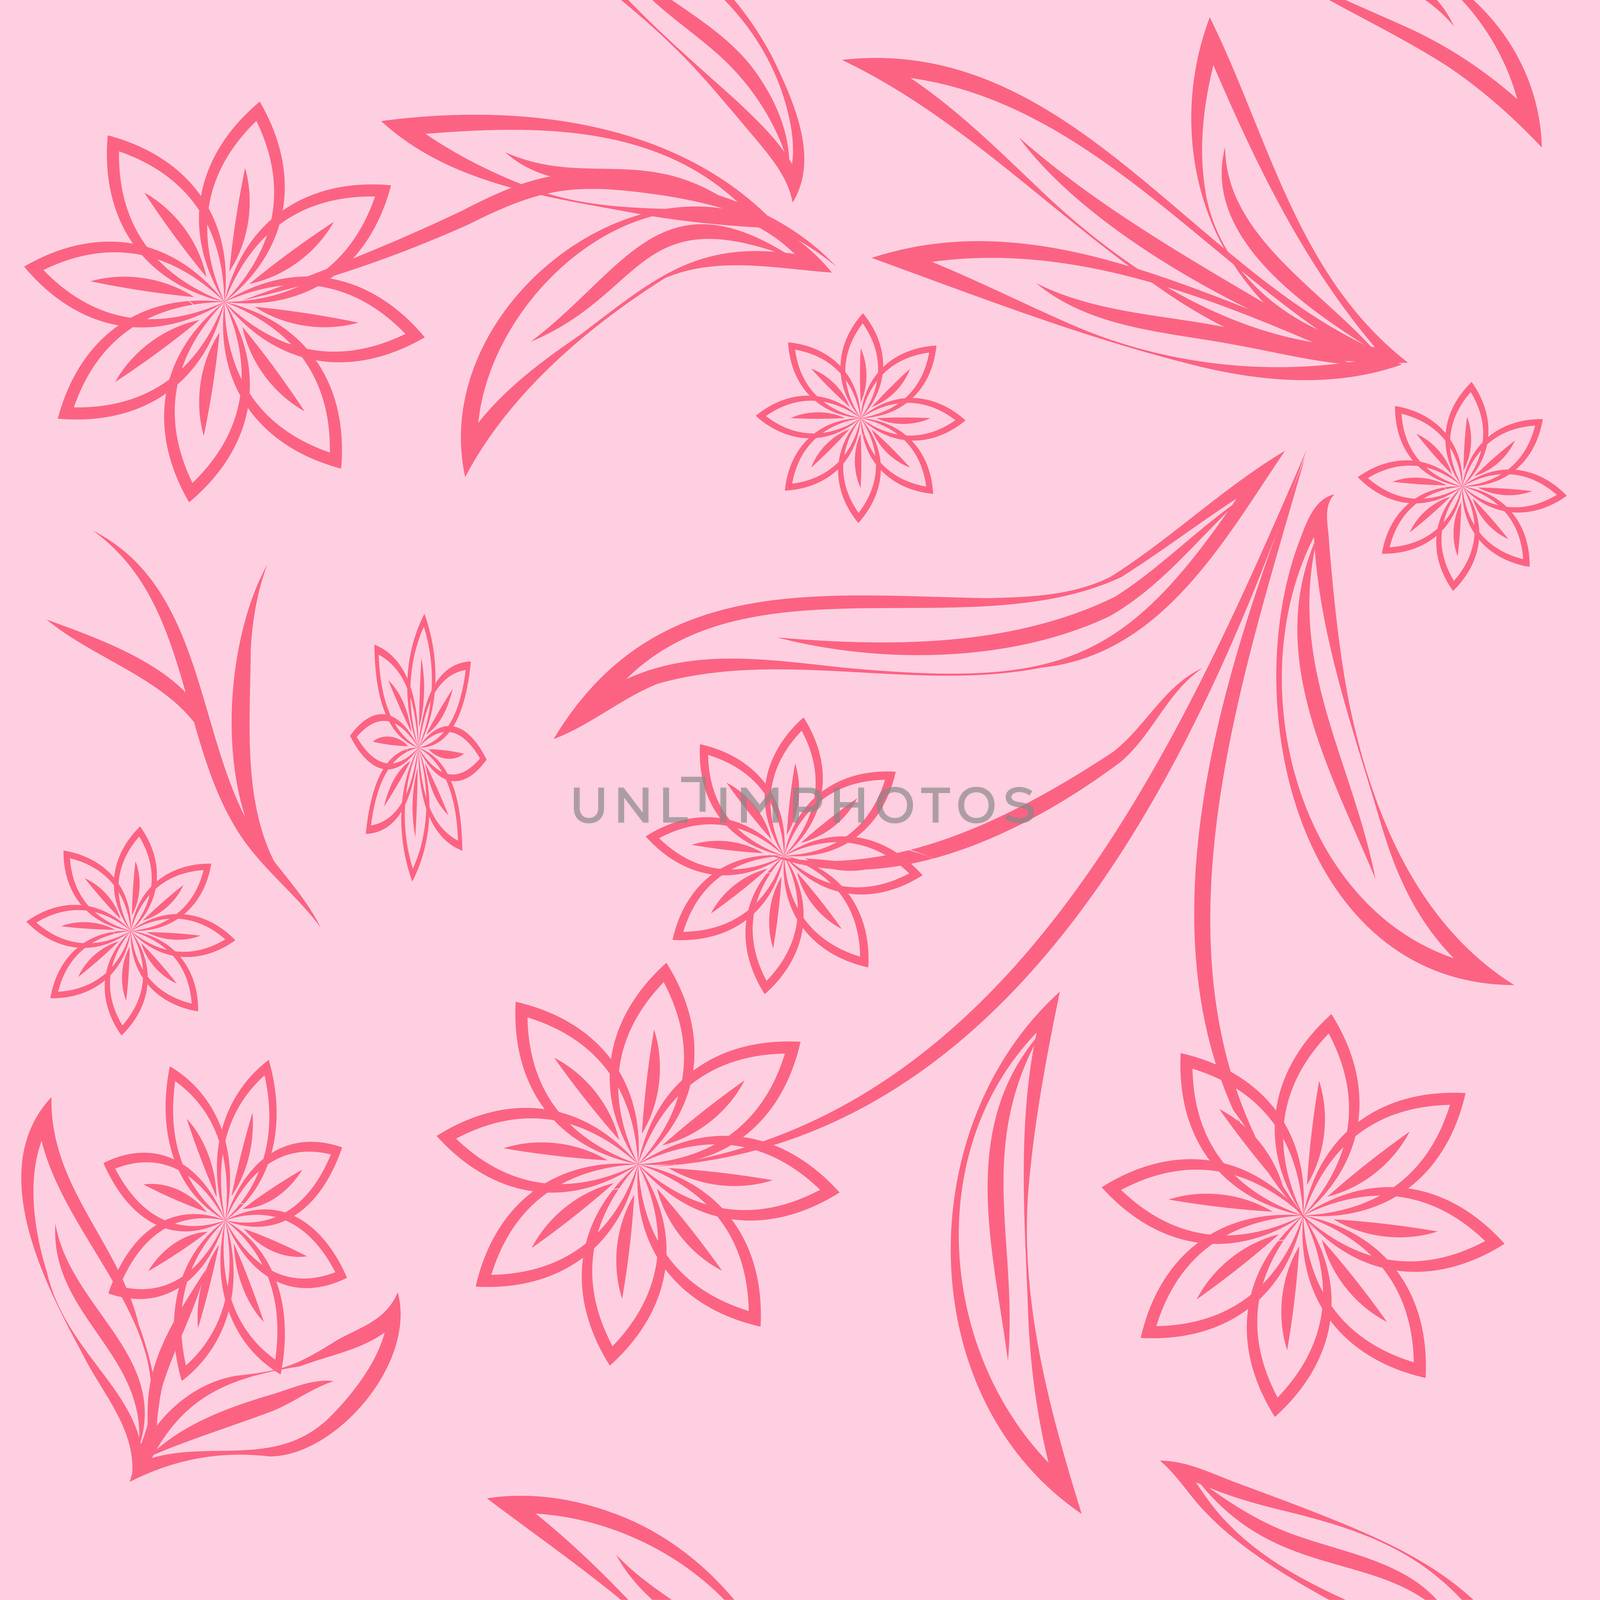 Linocut style hand drawn meadow flowers - seamless pattern. Wildflowers in modern cutout style isolated on background, vector illustration for textile, wallpaper.